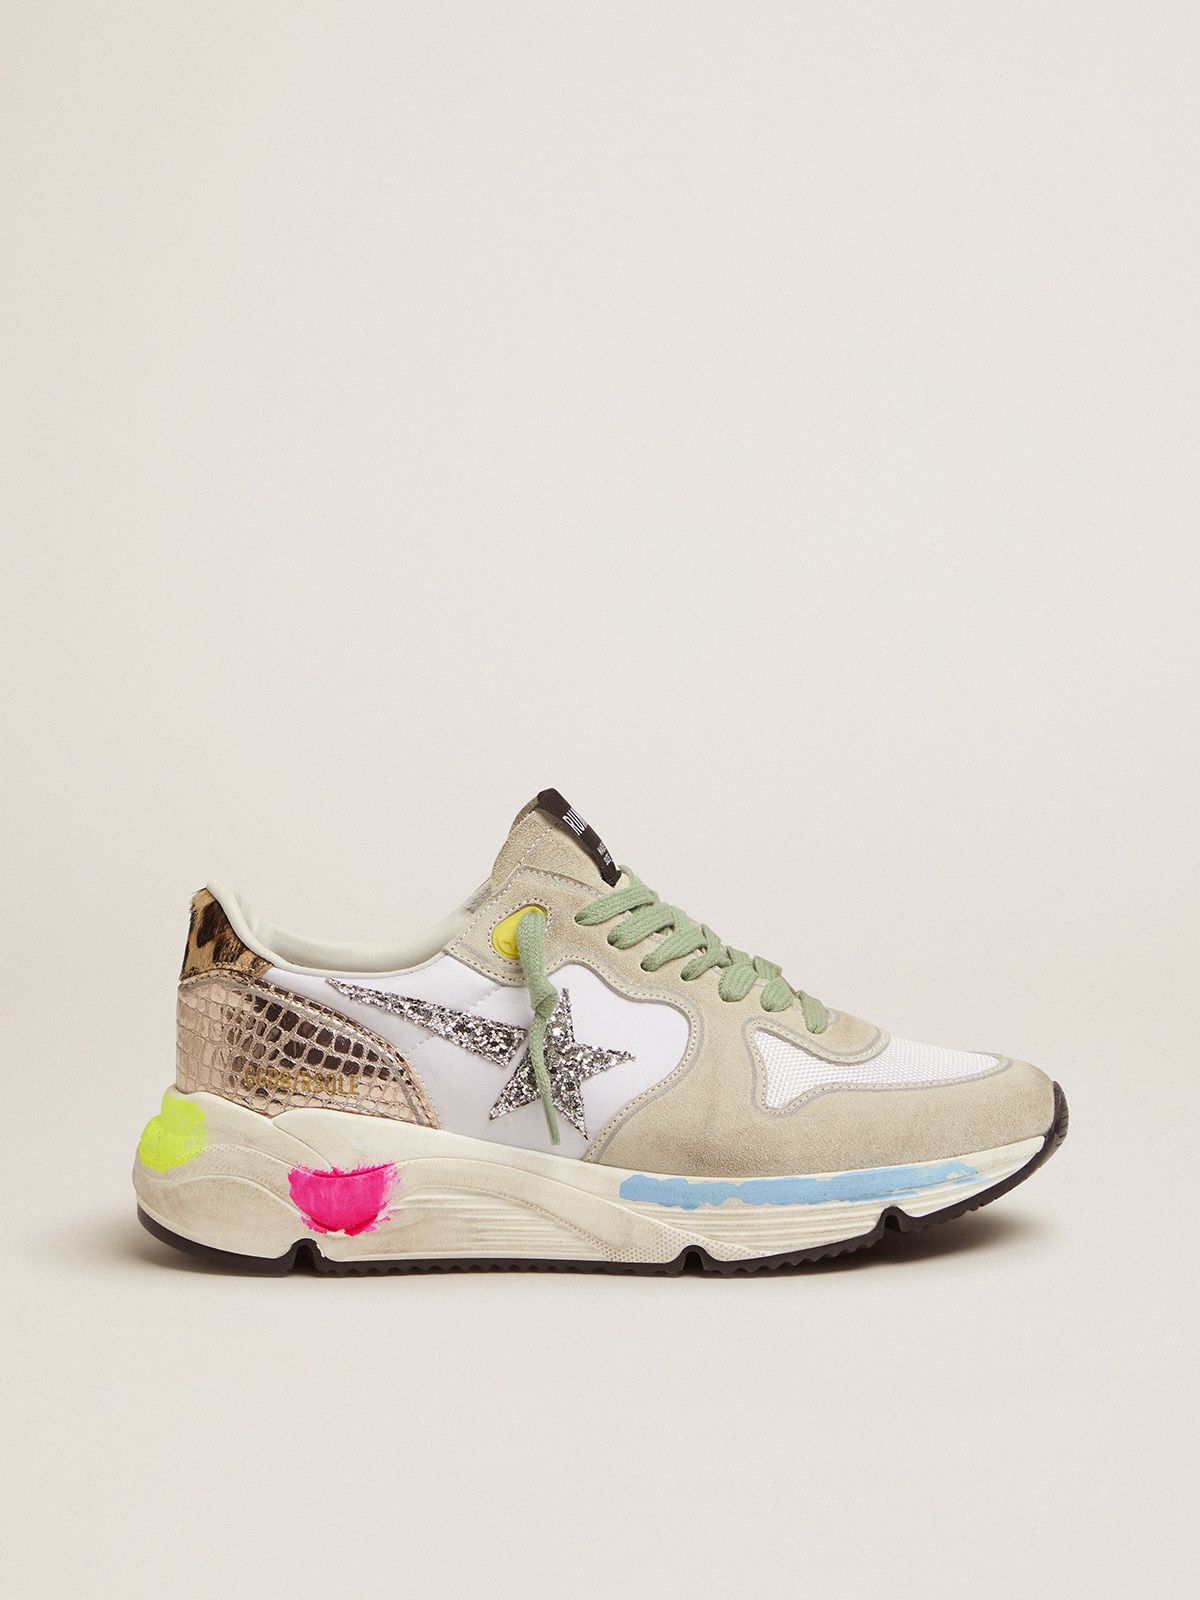 Golden Goose Ball Star Uomo Running Sole sneakers in suede with glitter and leopard print